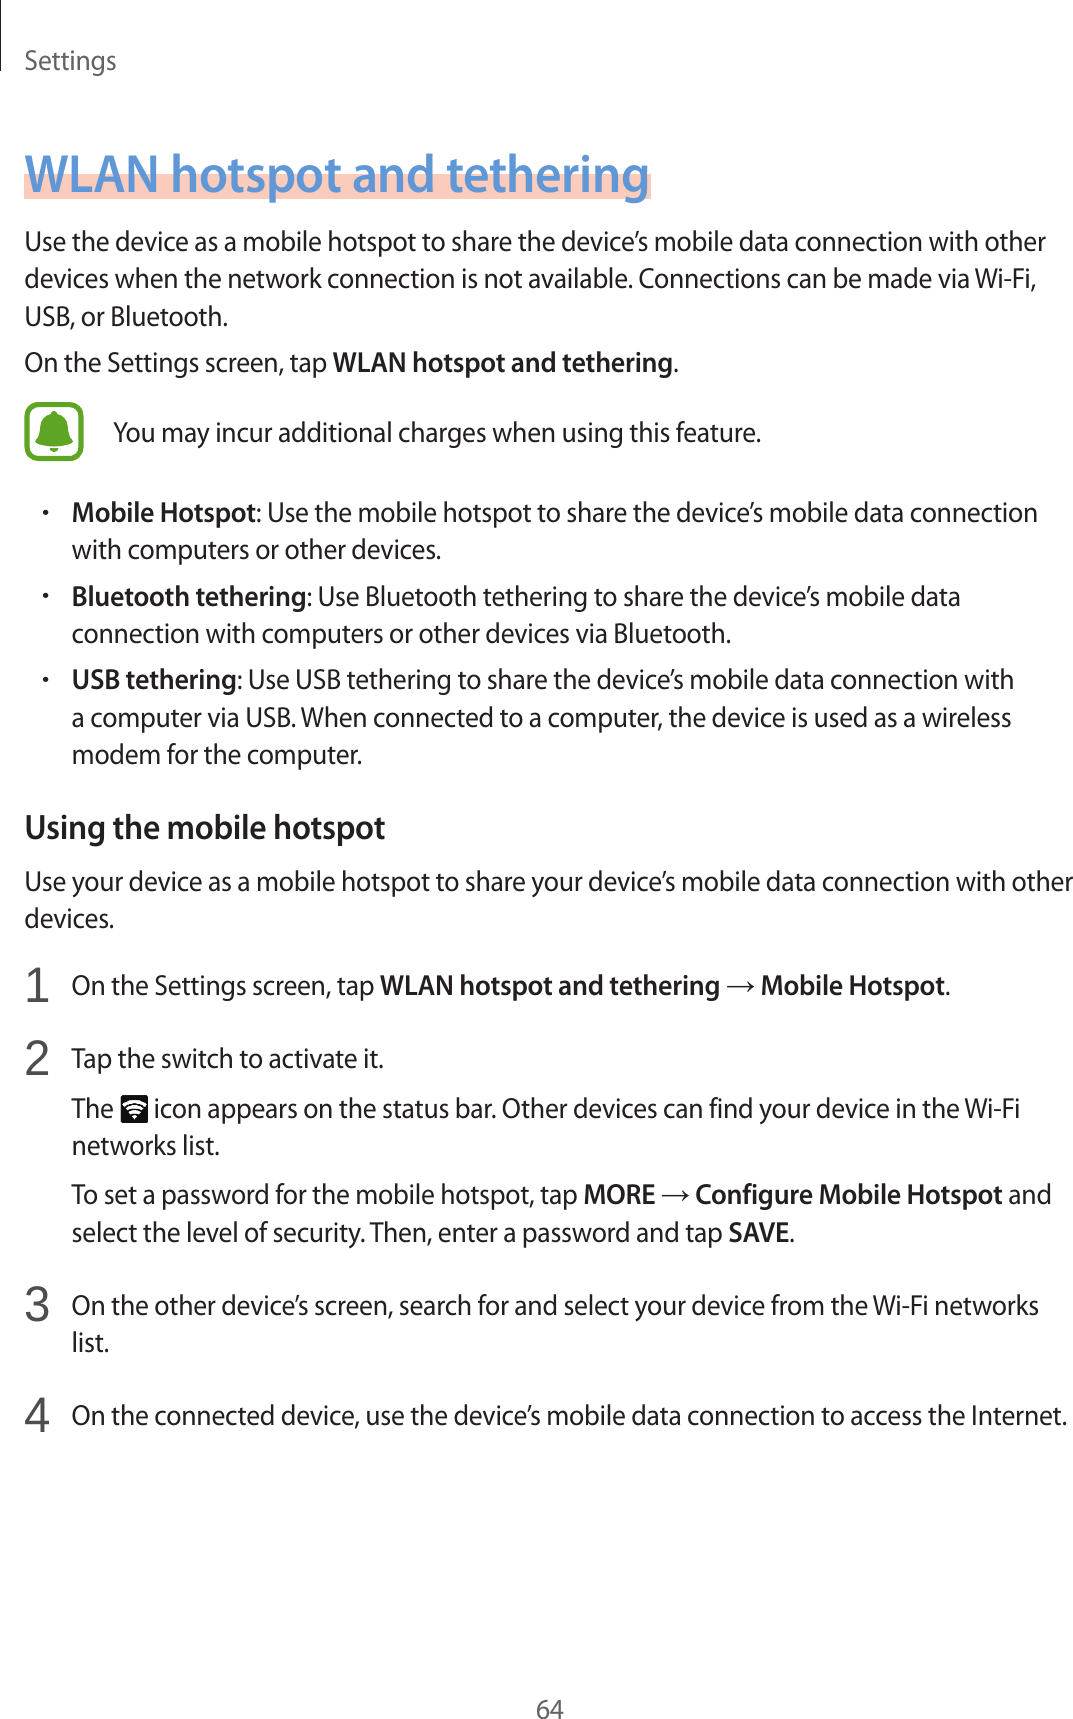 Settings64WLAN hotspot and tetheringUse the device as a mobile hotspot to share the device’s mobile data connection with other devices when the network connection is not available. Connections can be made via Wi-Fi, USB, or Bluetooth.On the Settings screen, tap WLAN hotspot and tethering.You may incur additional charges when using this feature.•Mobile Hotspot: Use the mobile hotspot to share the device’s mobile data connection with computers or other devices.•Bluetooth tethering: Use Bluetooth tethering to share the device’s mobile data connection with computers or other devices via Bluetooth.•USB tethering: Use USB tethering to share the device’s mobile data connection with a computer via USB. When connected to a computer, the device is used as a wireless modem for the computer.Using the mobile hotspotUse your device as a mobile hotspot to share your device’s mobile data connection with other devices.1  On the Settings screen, tap WLAN hotspot and tethering → Mobile Hotspot.2  Tap the switch to activate it.The   icon appears on the status bar. Other devices can find your device in the Wi-Fi networks list.To set a password for the mobile hotspot, tap MORE → Configure Mobile Hotspot and select the level of security. Then, enter a password and tap SAVE.3  On the other device’s screen, search for and select your device from the Wi-Fi networks list.4  On the connected device, use the device’s mobile data connection to access the Internet.